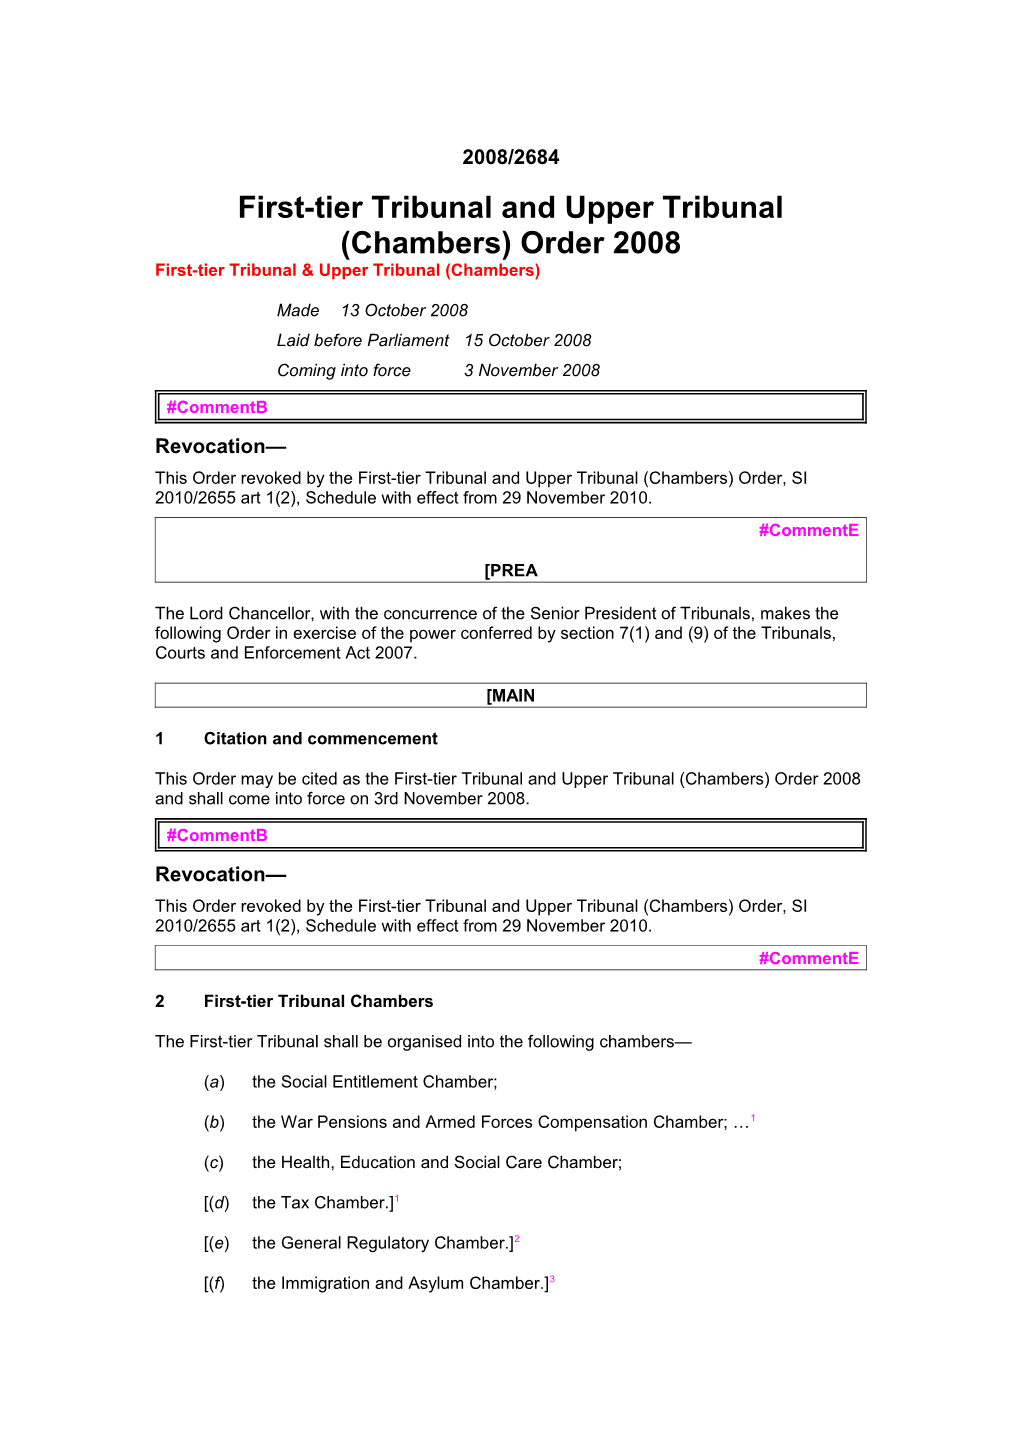 First-Tier Tribunal and Upper Tribunal (Chambers) Order 2008